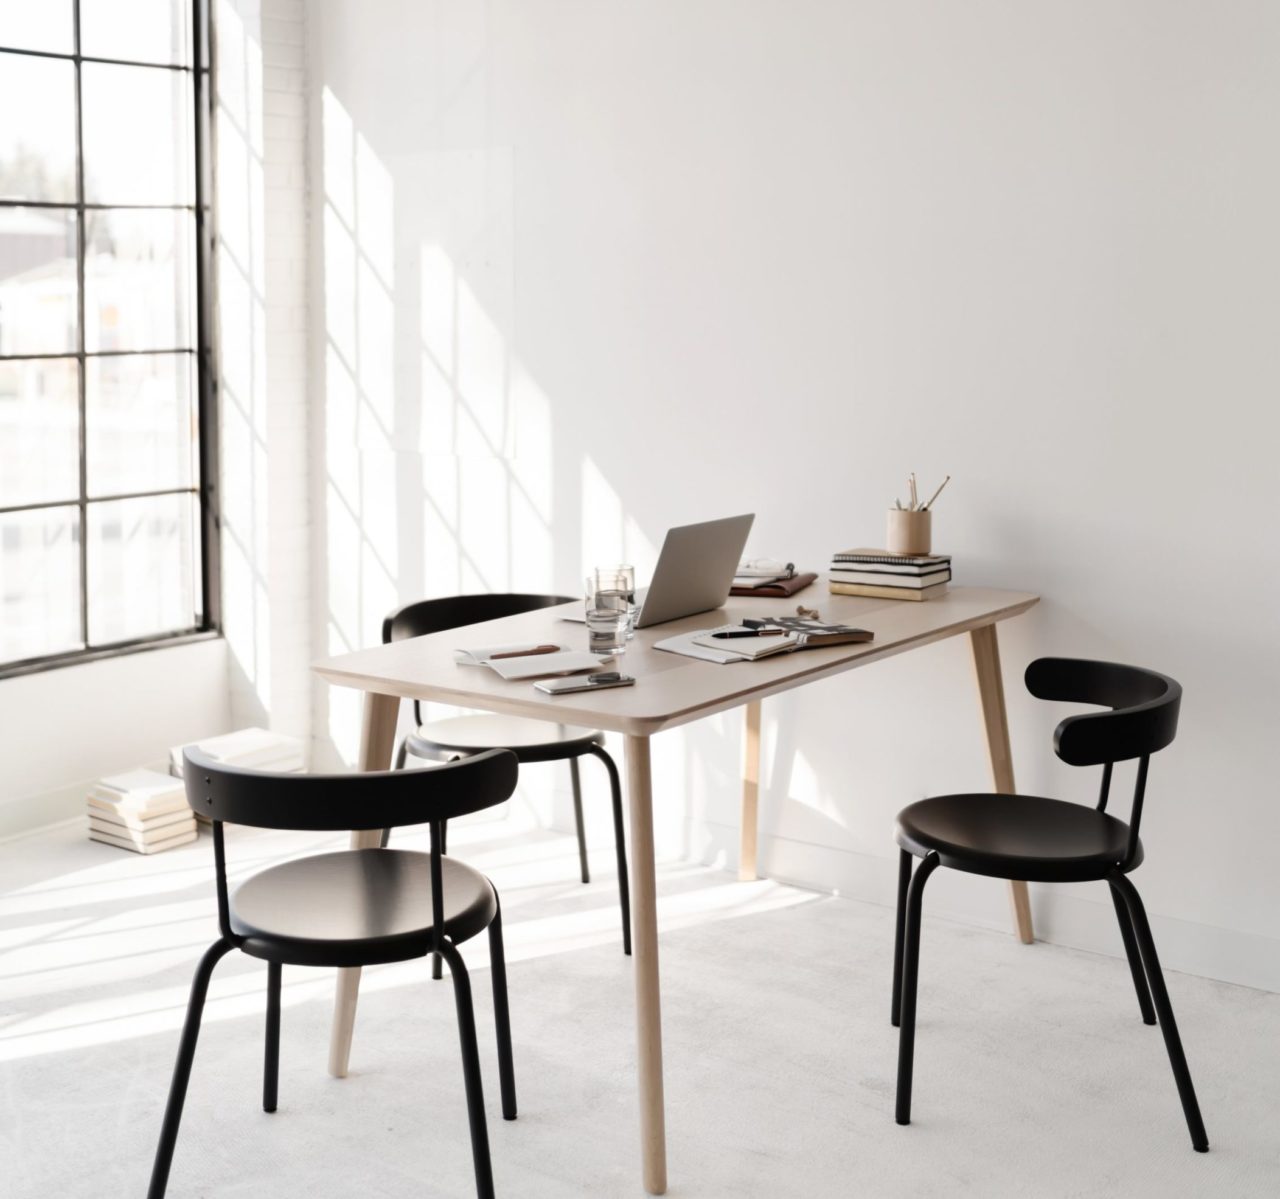 Desk and three chairs in a sunny office space